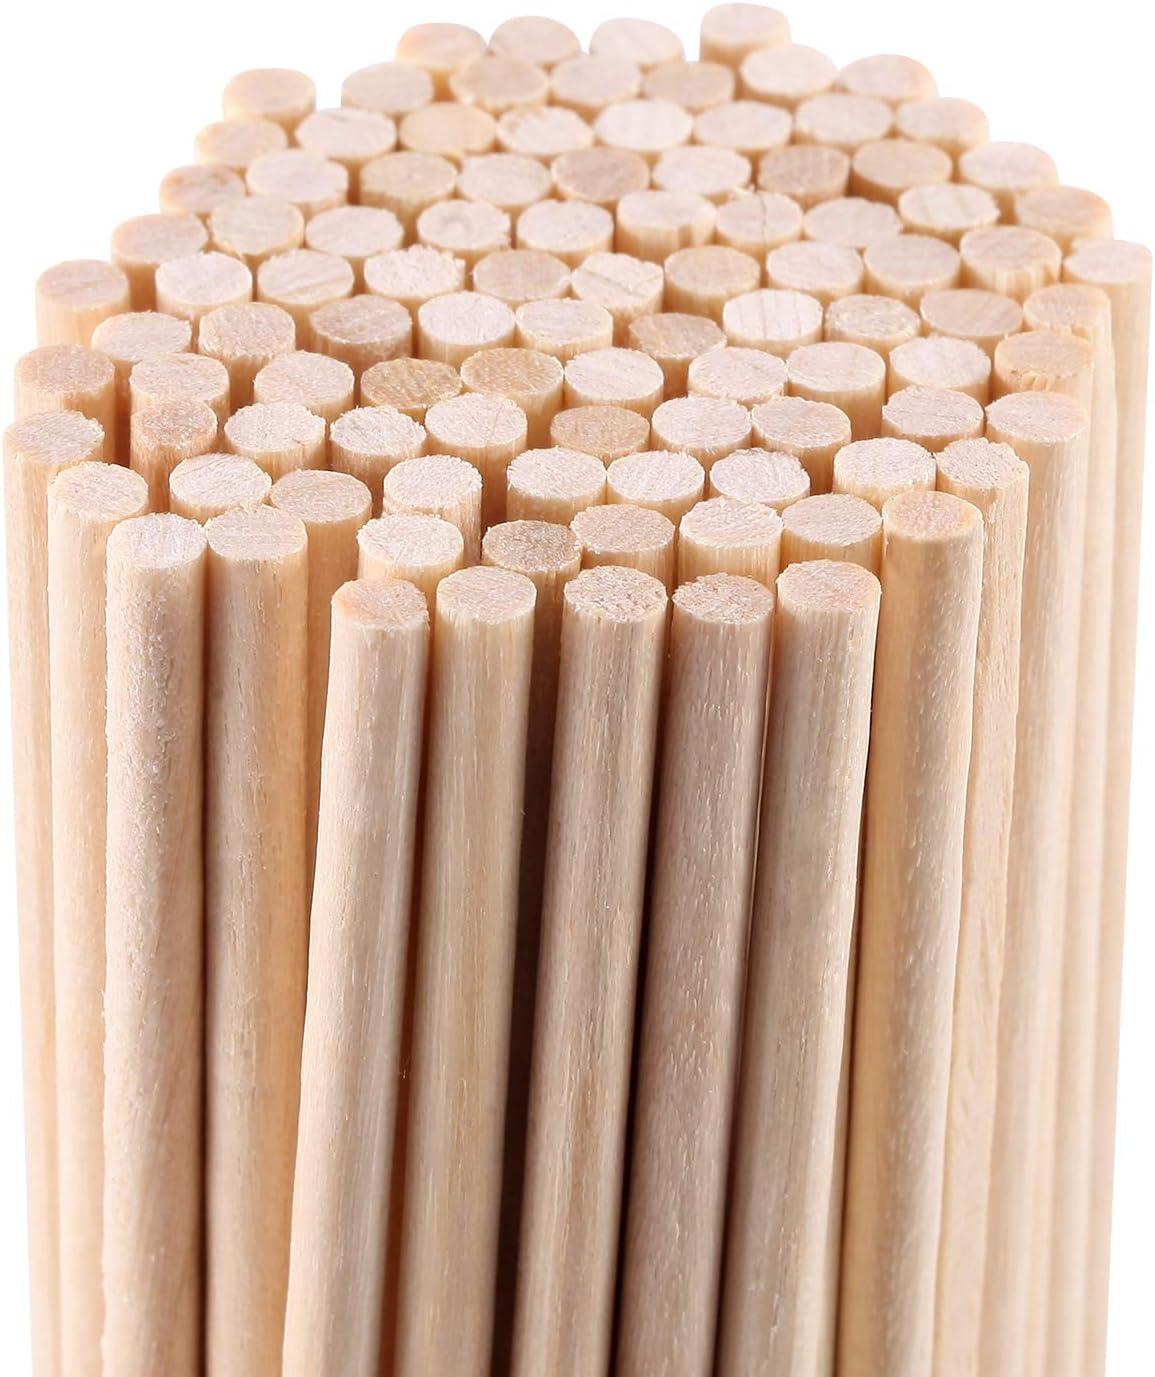 Senkary Wooden Dowel Rods 1/8 x 6 Inch Unfinished Natural Wood